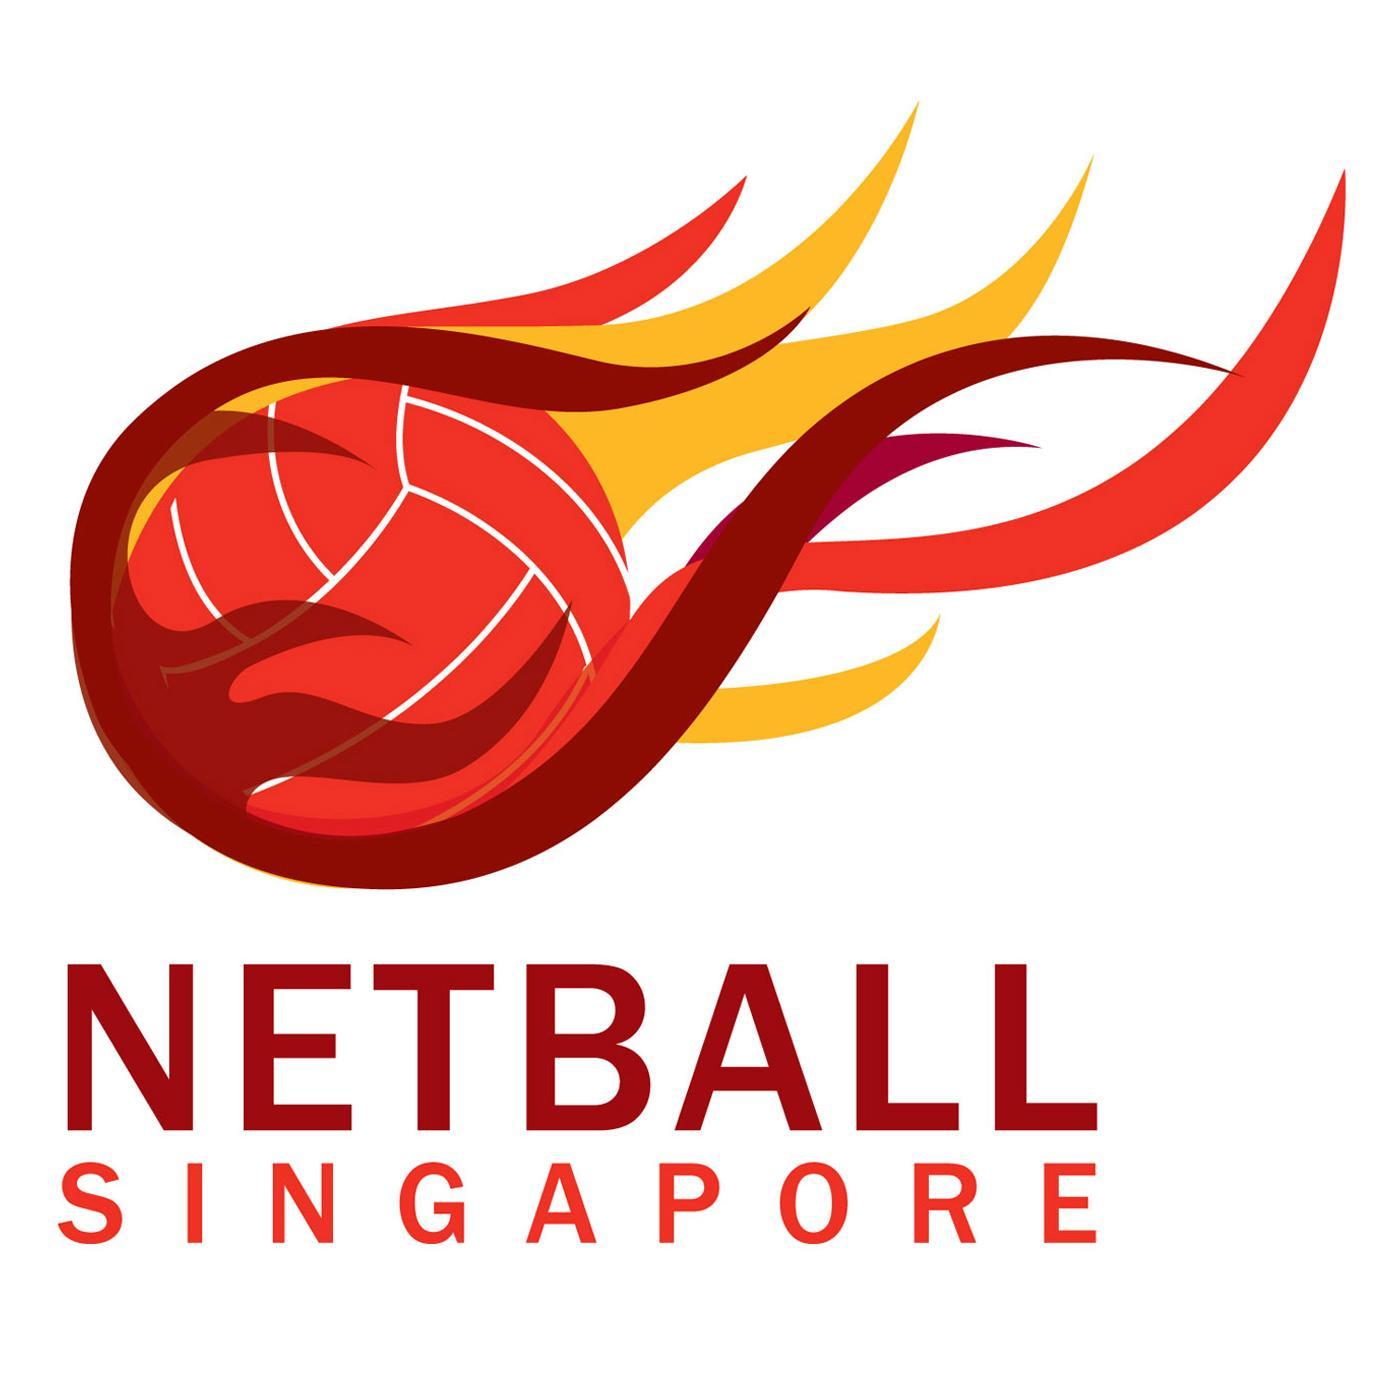 All about Netball in Singapore!